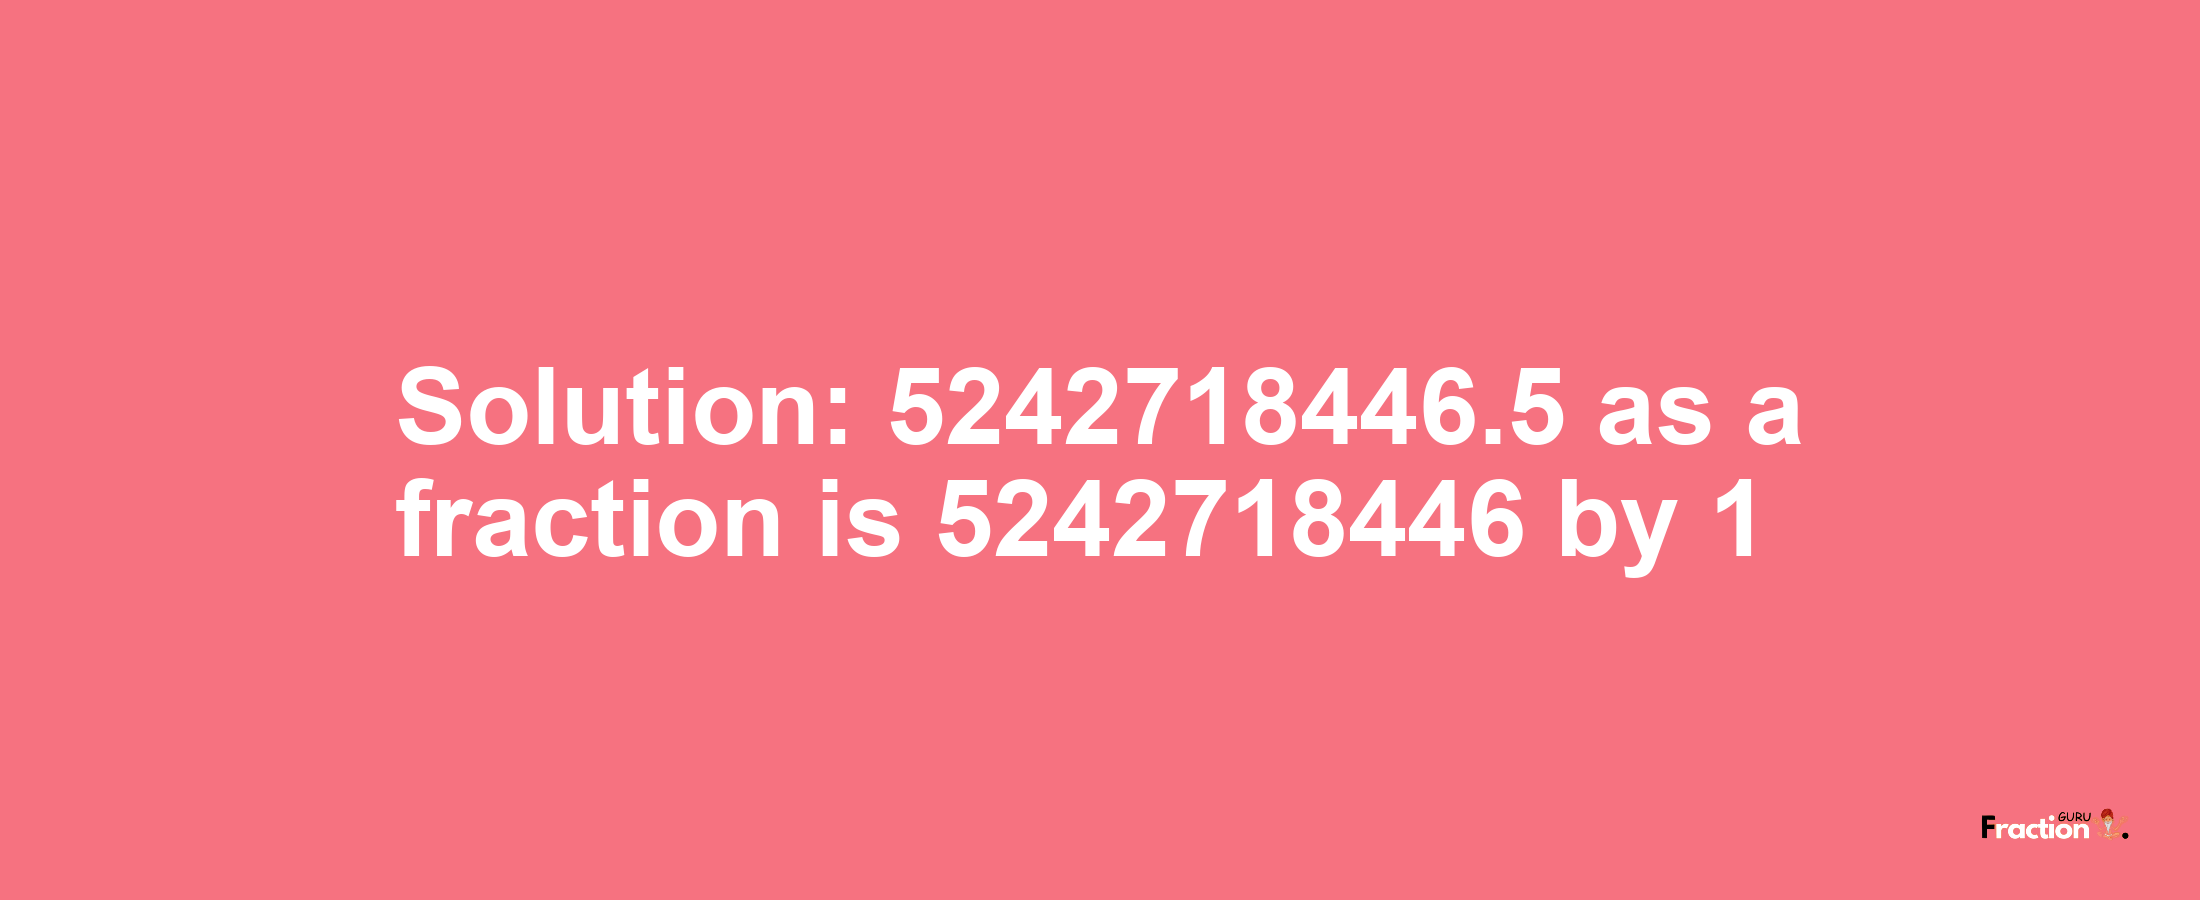 Solution:5242718446.5 as a fraction is 5242718446/1